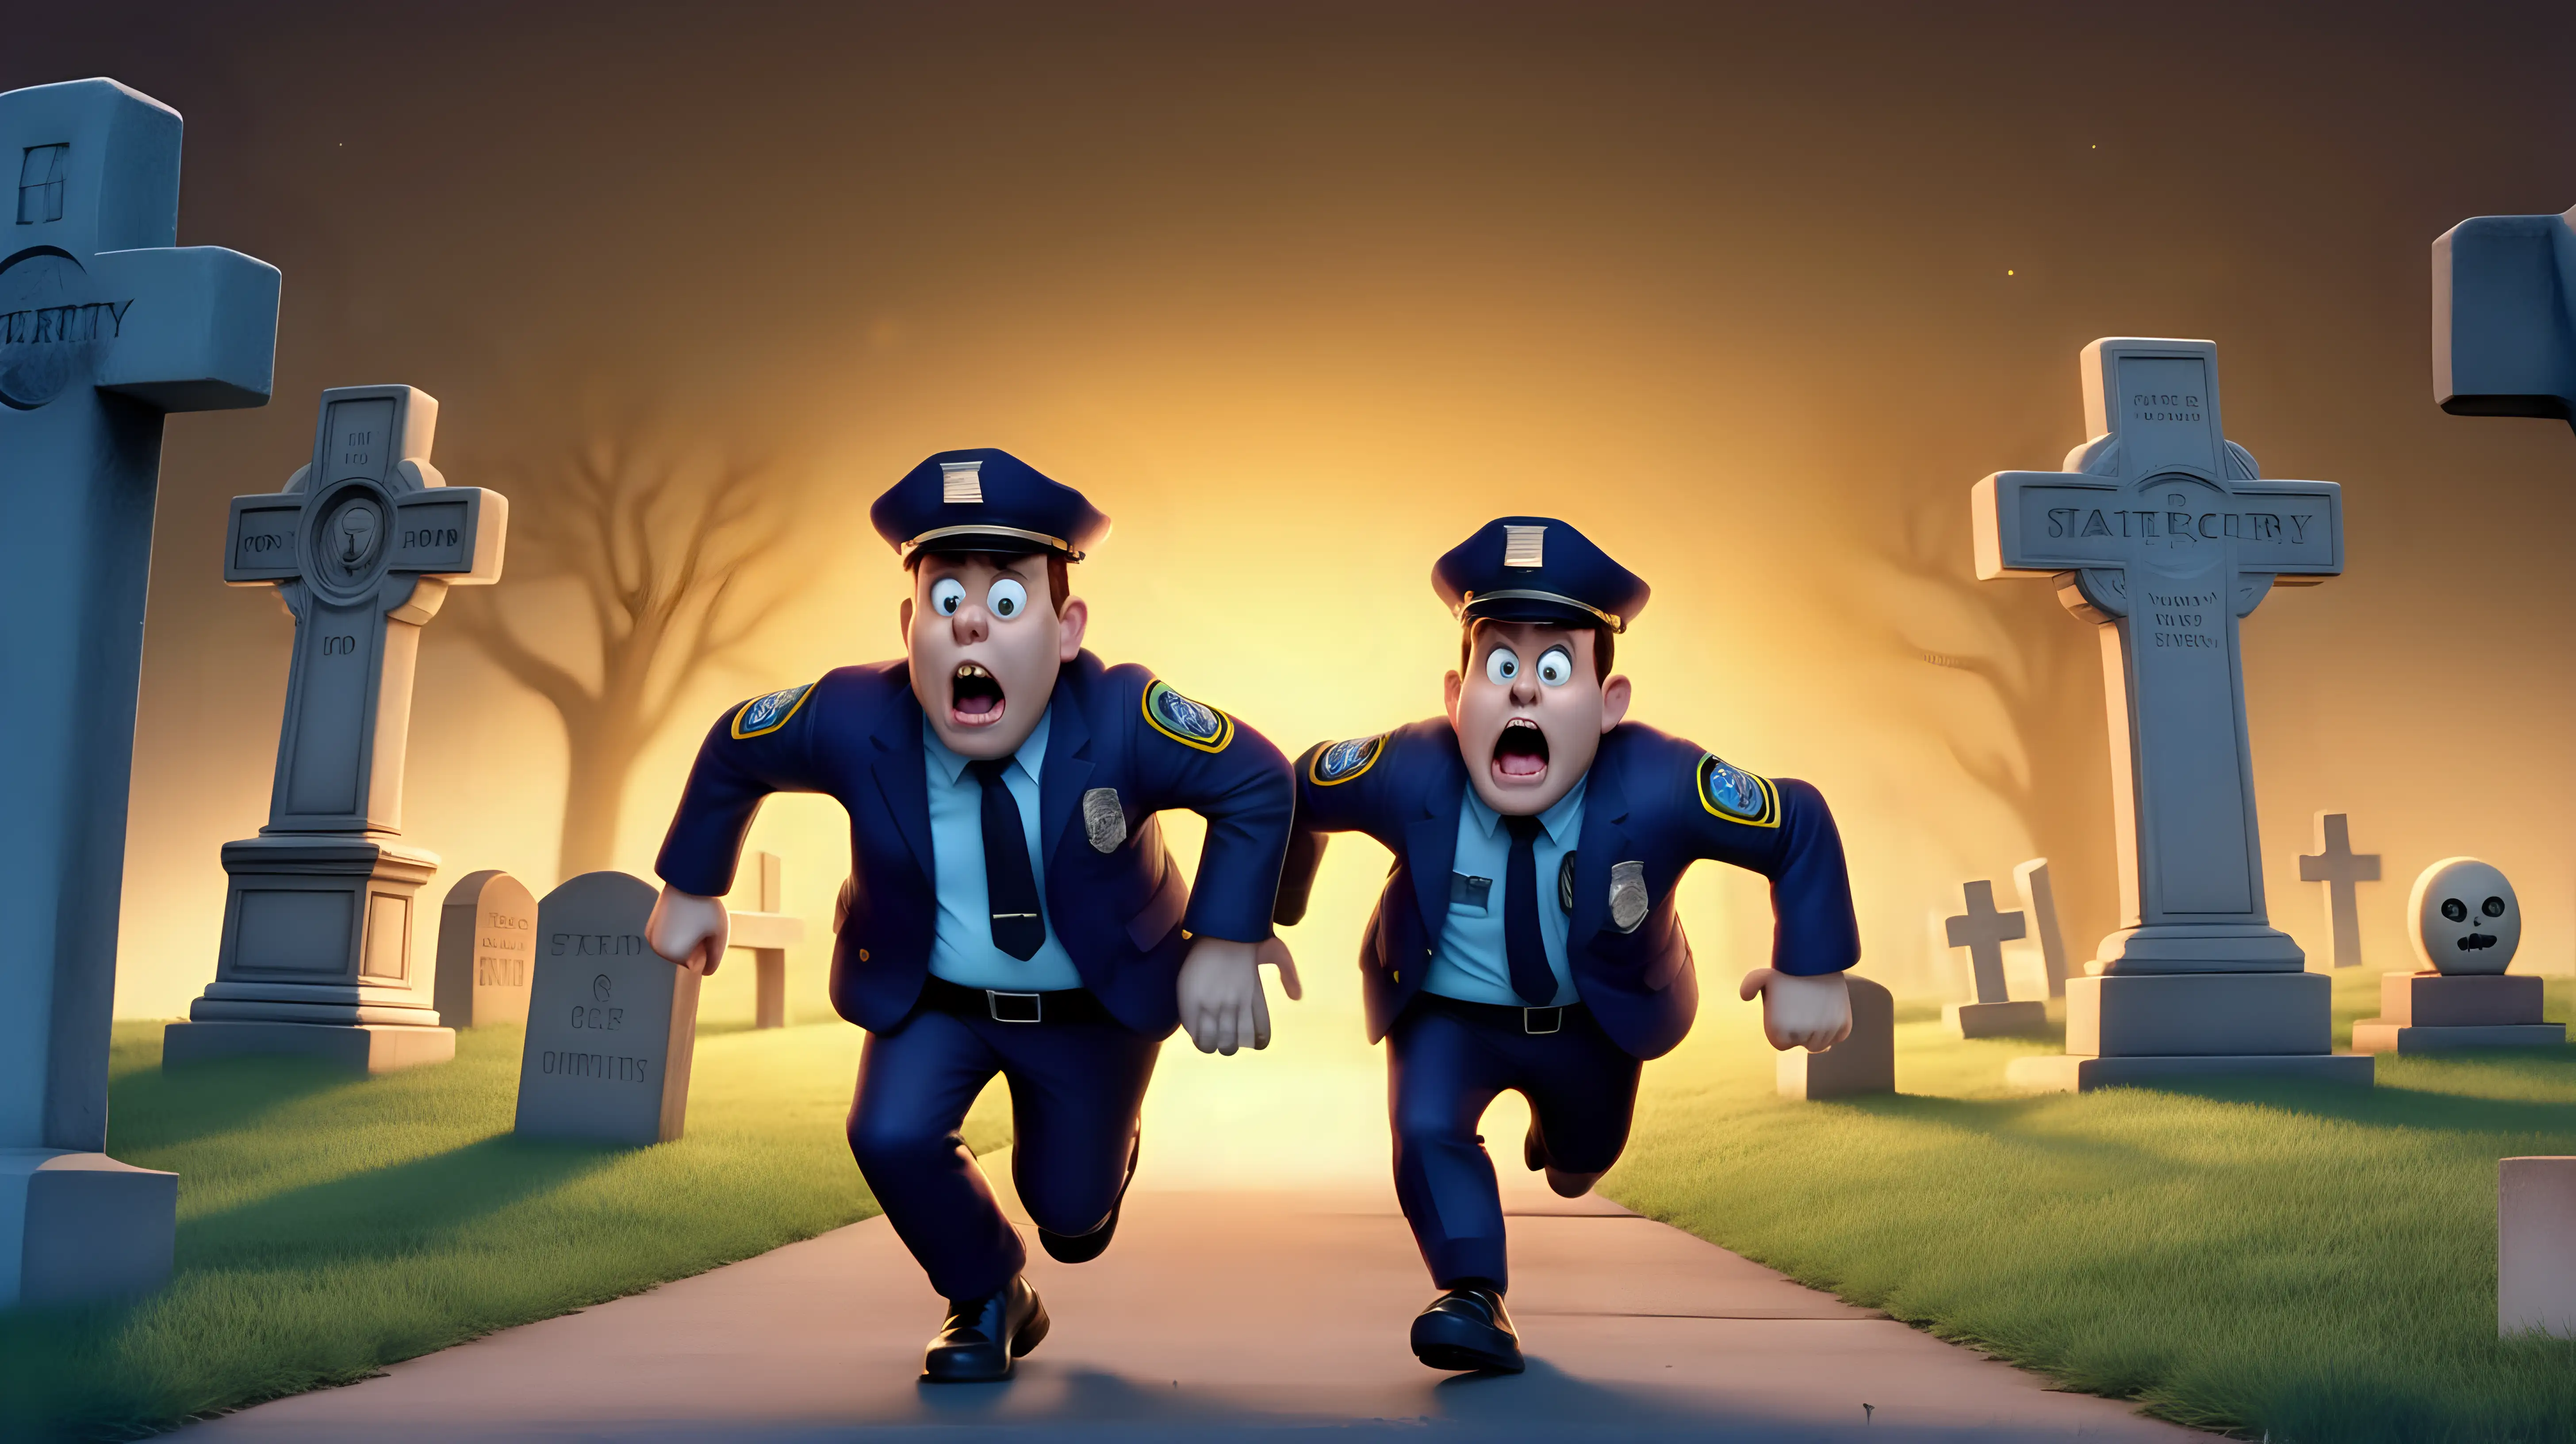 Cinematic American Cartoon Scene Scared Security Guards Running Away at Cemetery